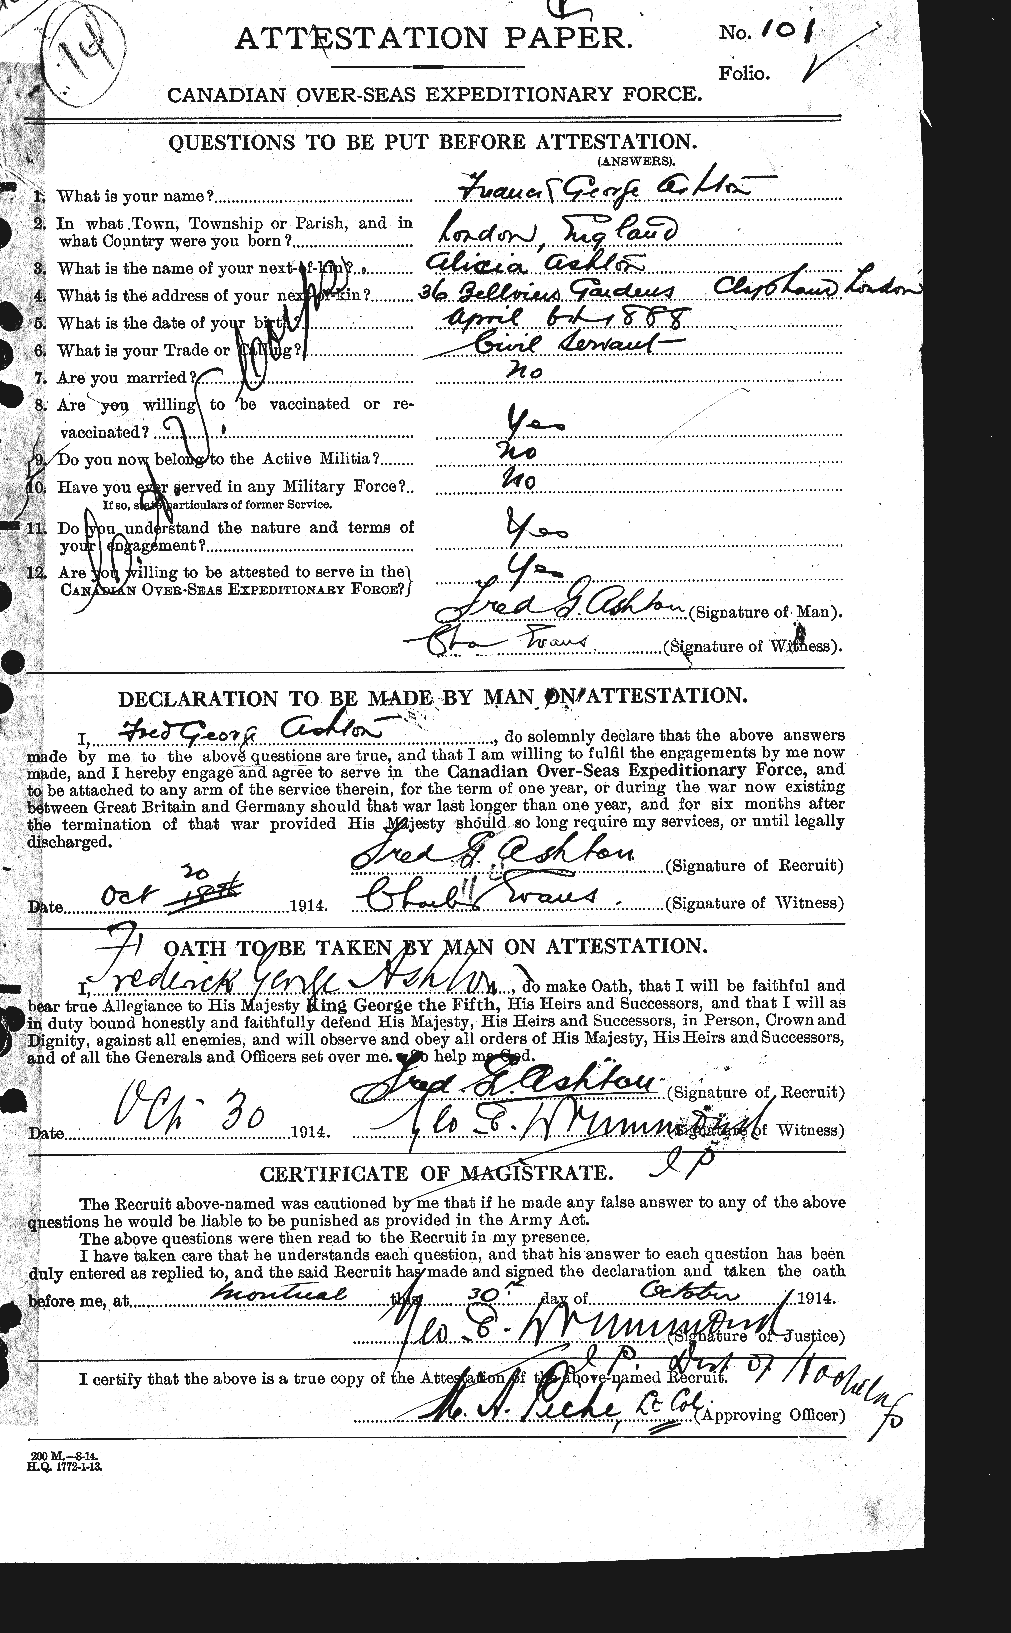 Personnel Records of the First World War - CEF 223080a